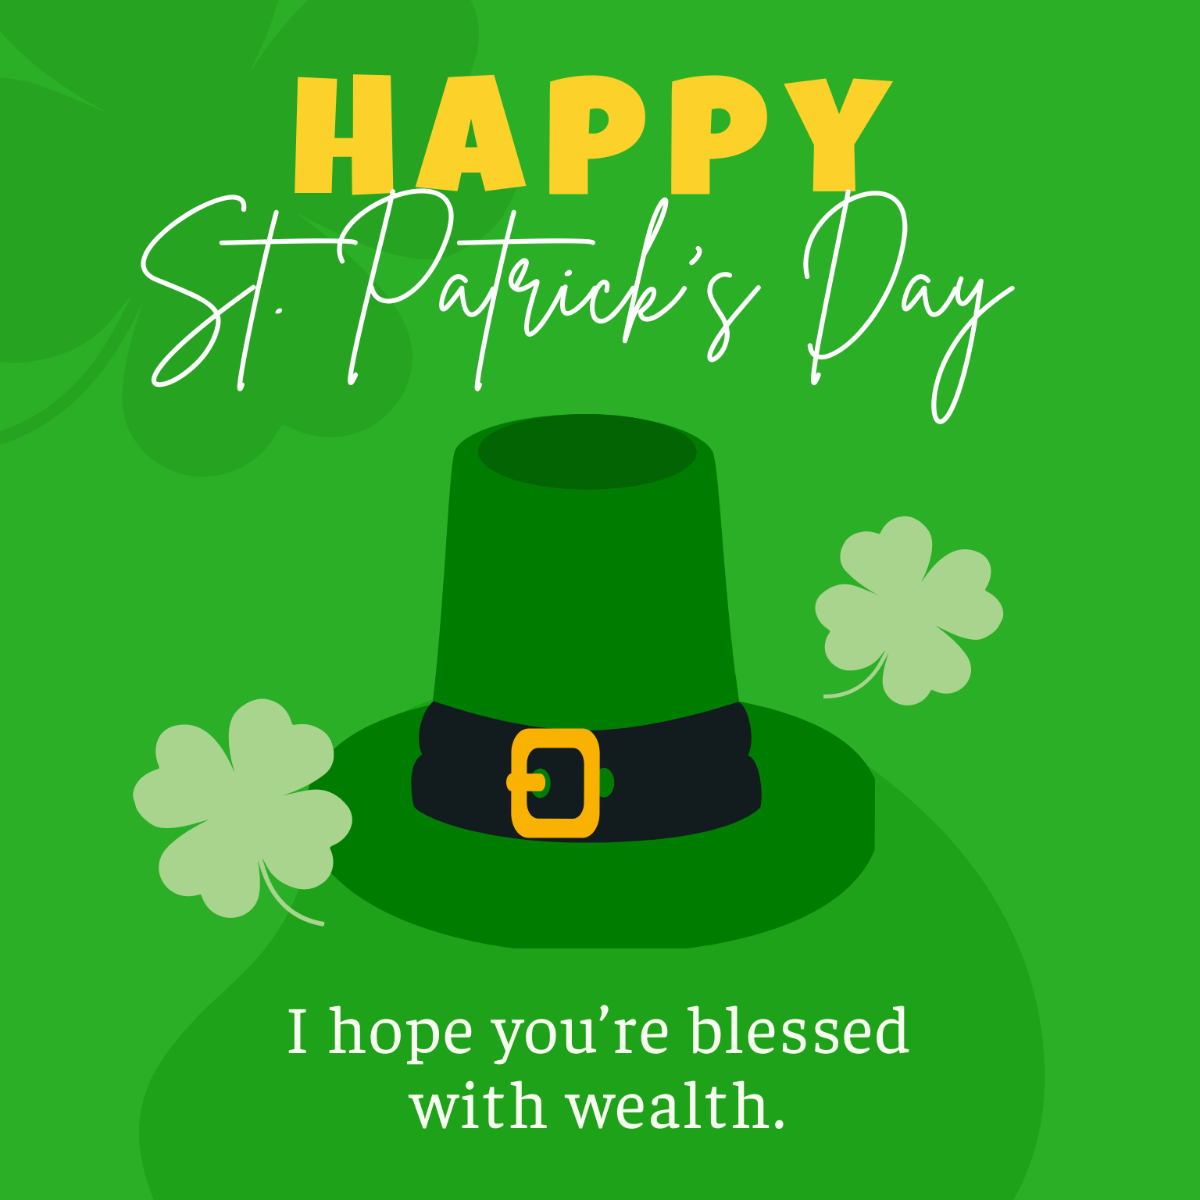 St. Patrick's Day Greeting Card Vector Template